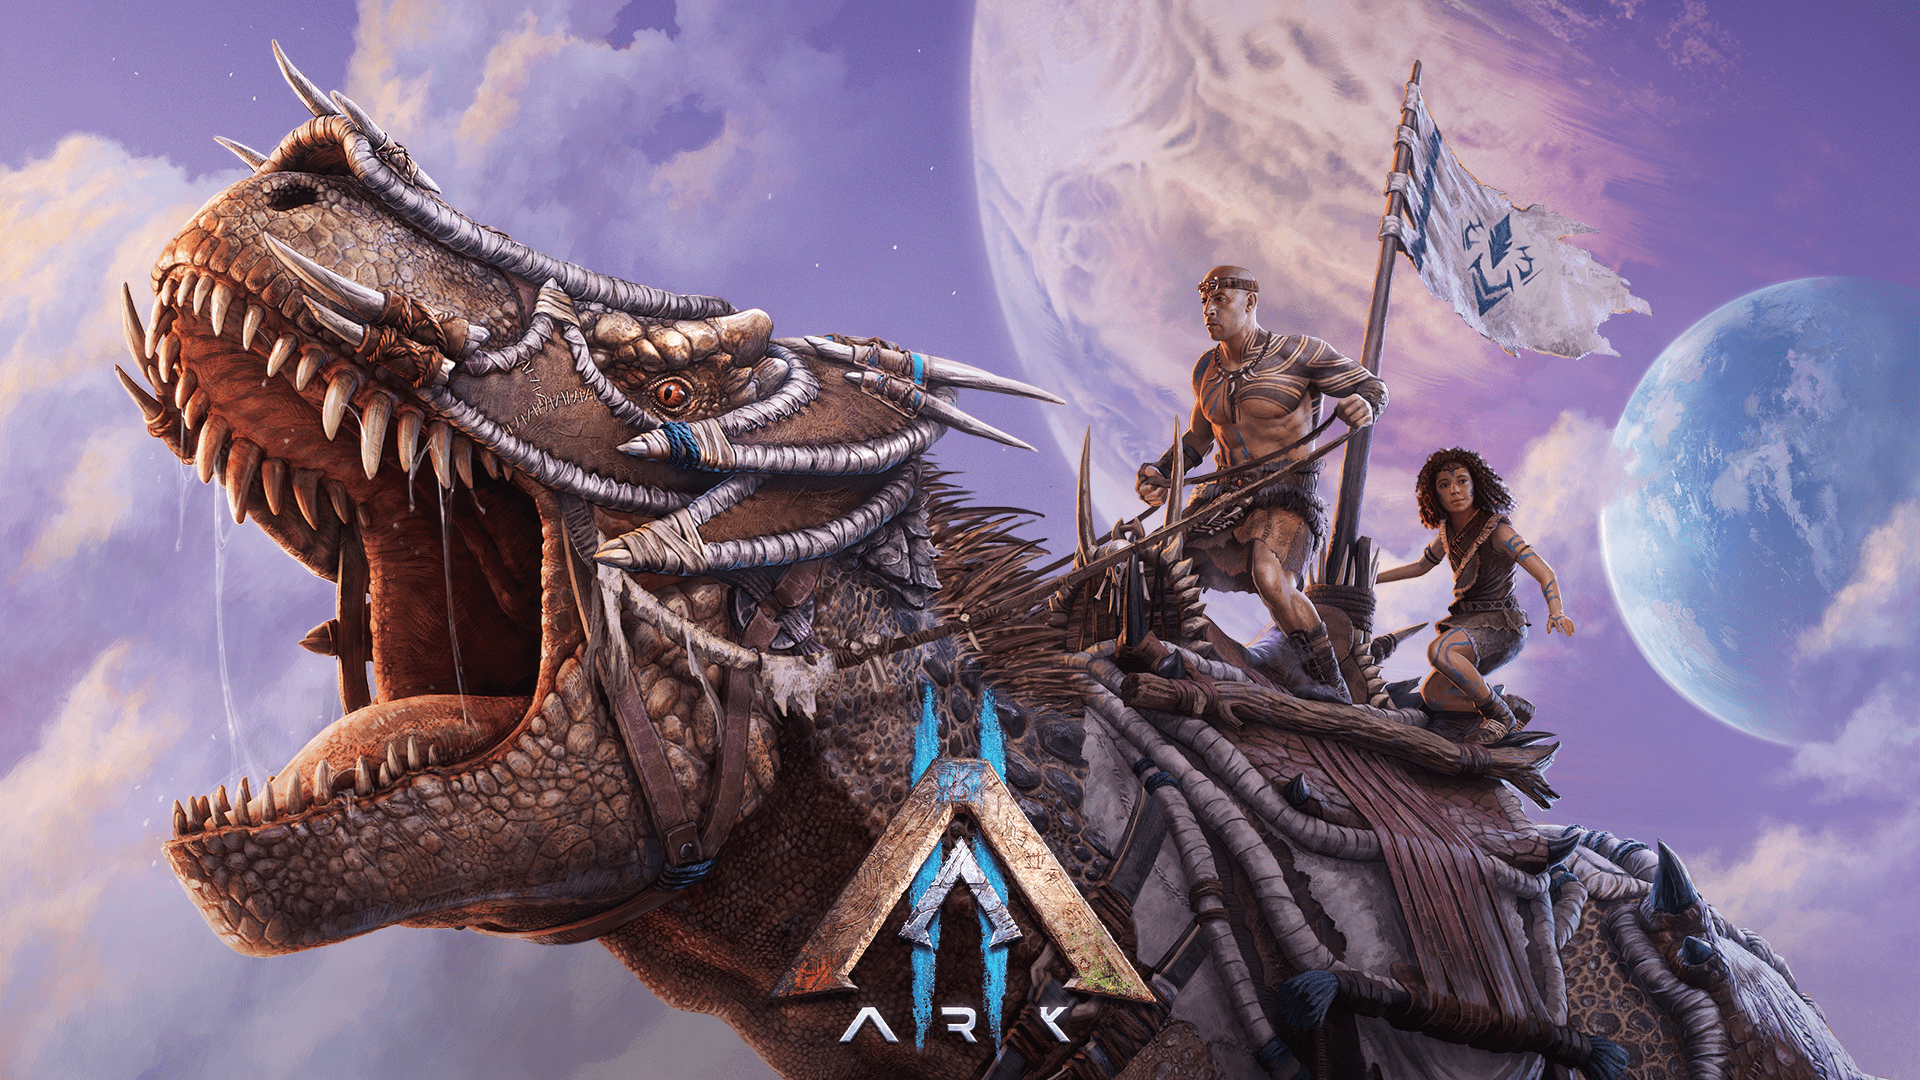 Ark 2 Wallpapers - Top Free Ark 2 Backgrounds - WallpaperAccess